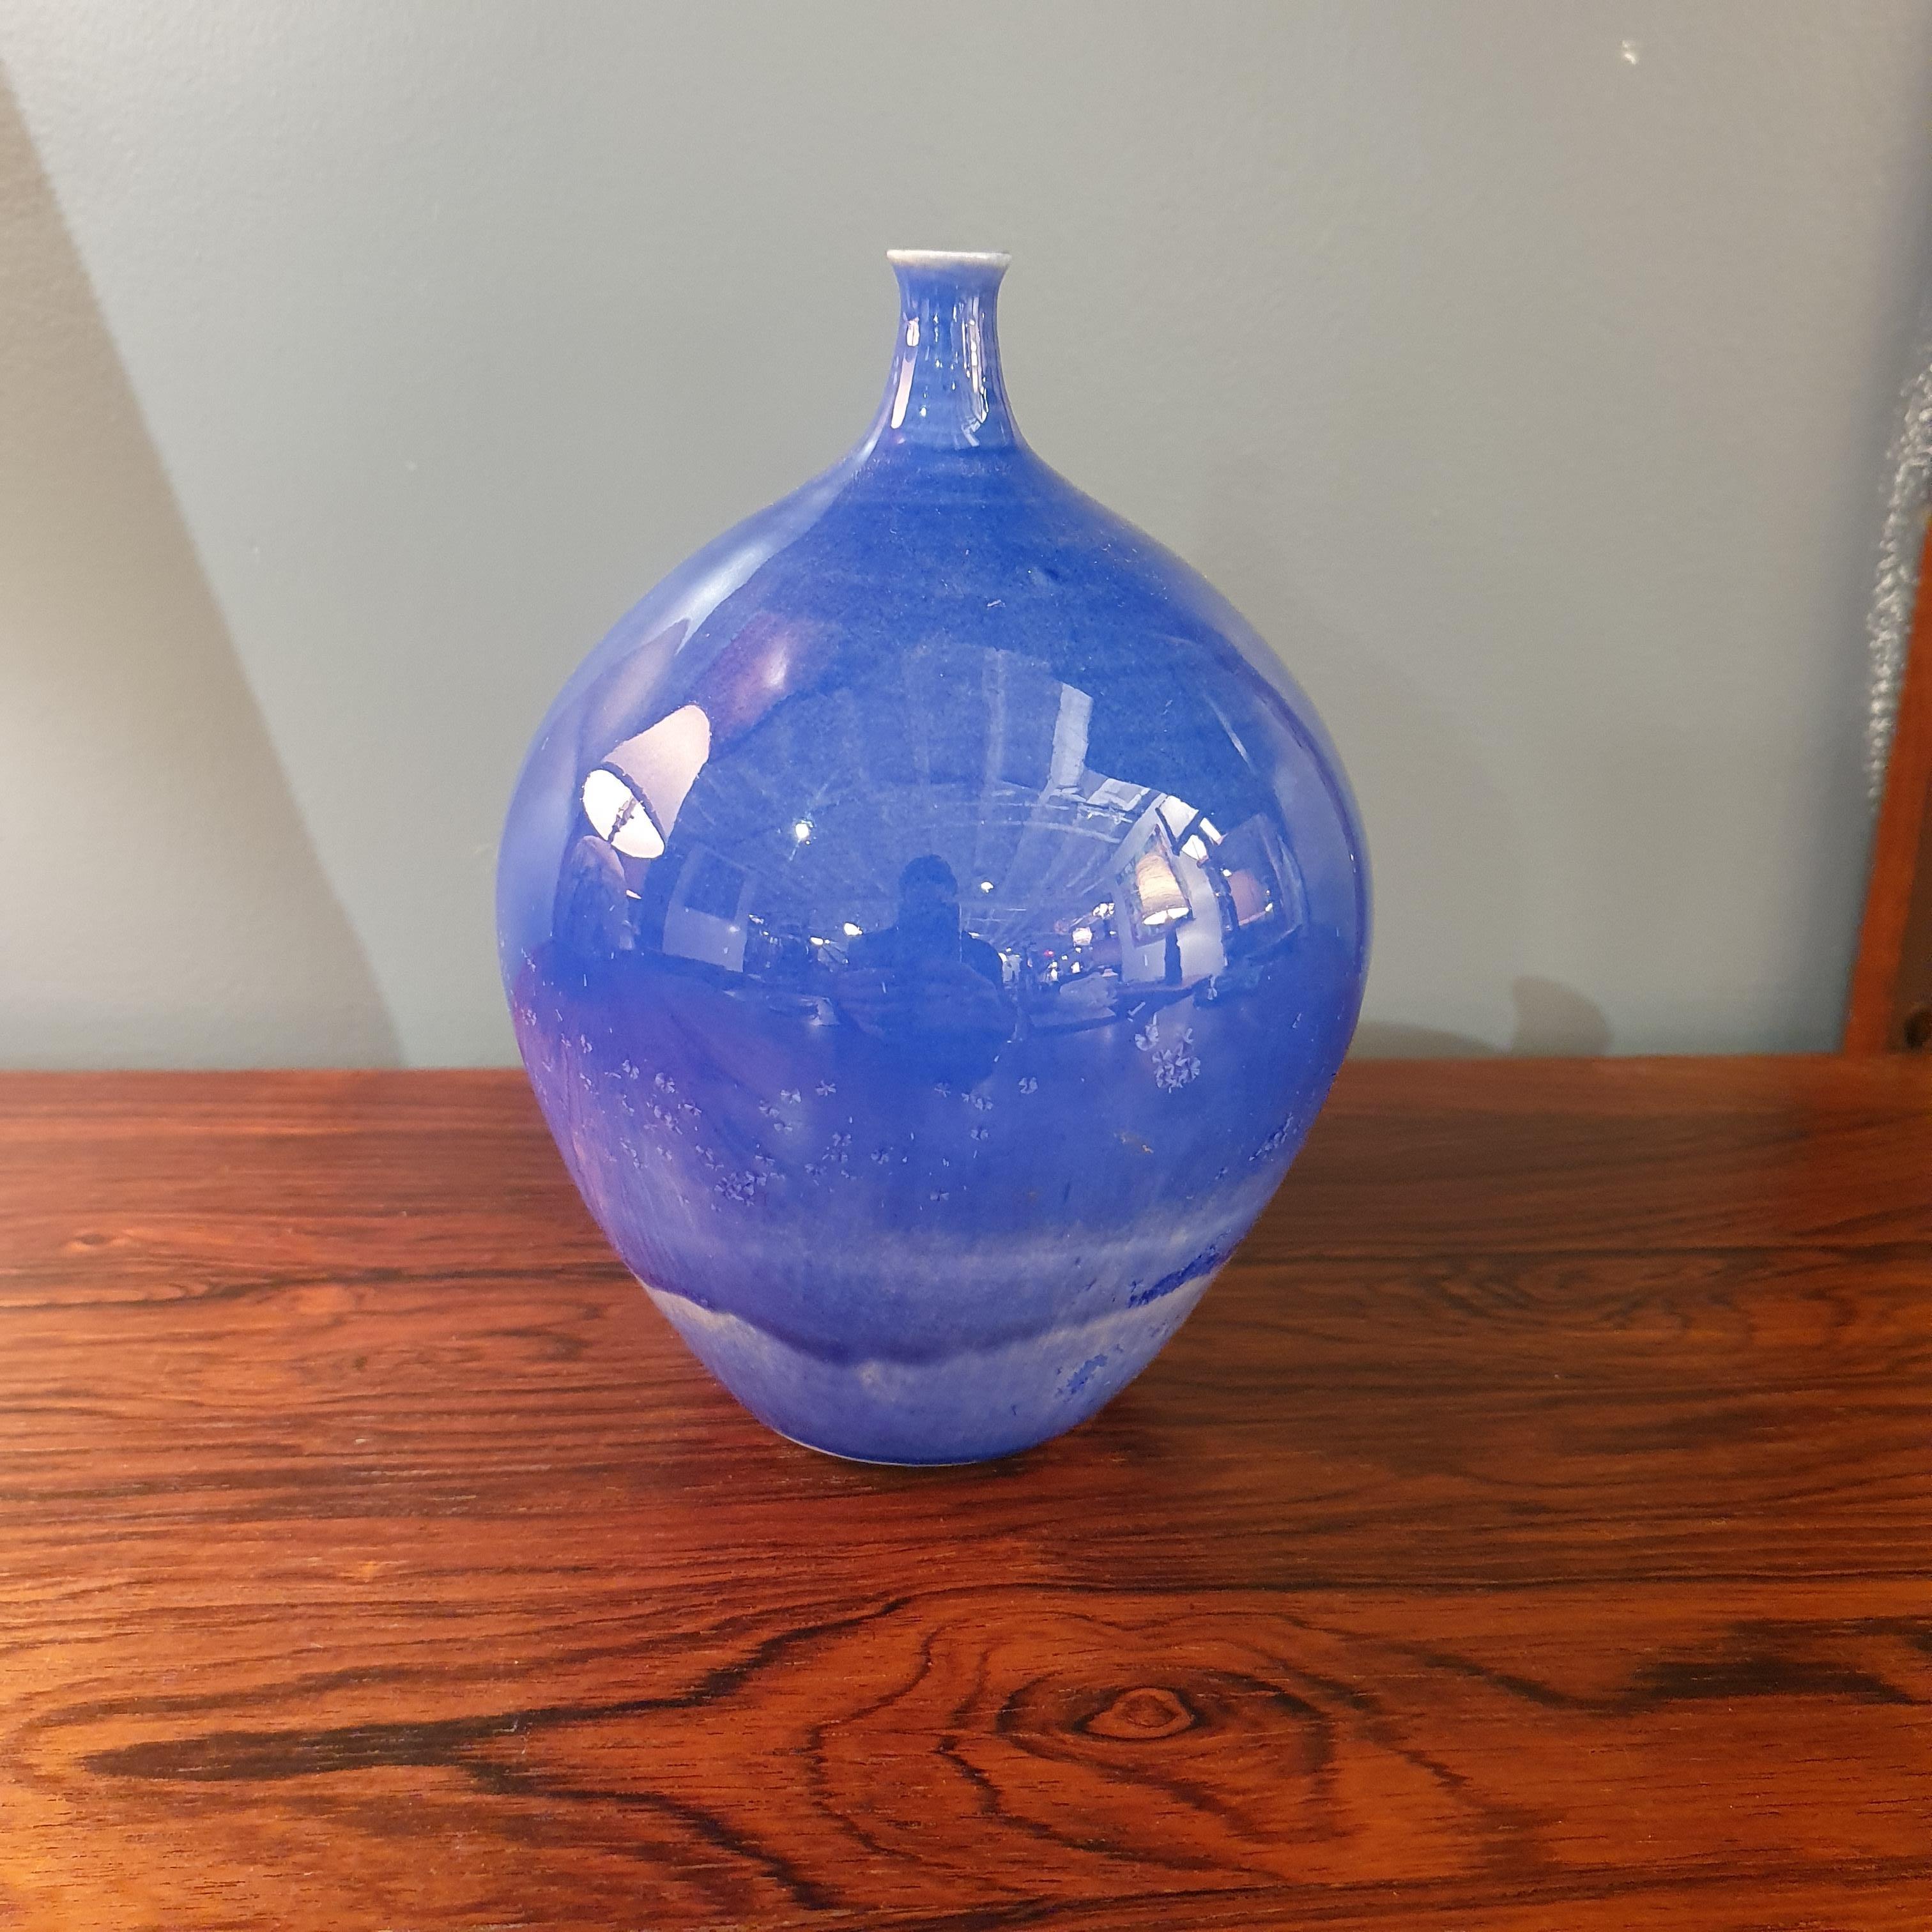 Beautiful blue glazed ceramic studio pottery bud vase. Measures 4.5 round and 6.5 tall. Signed by artist on underside 